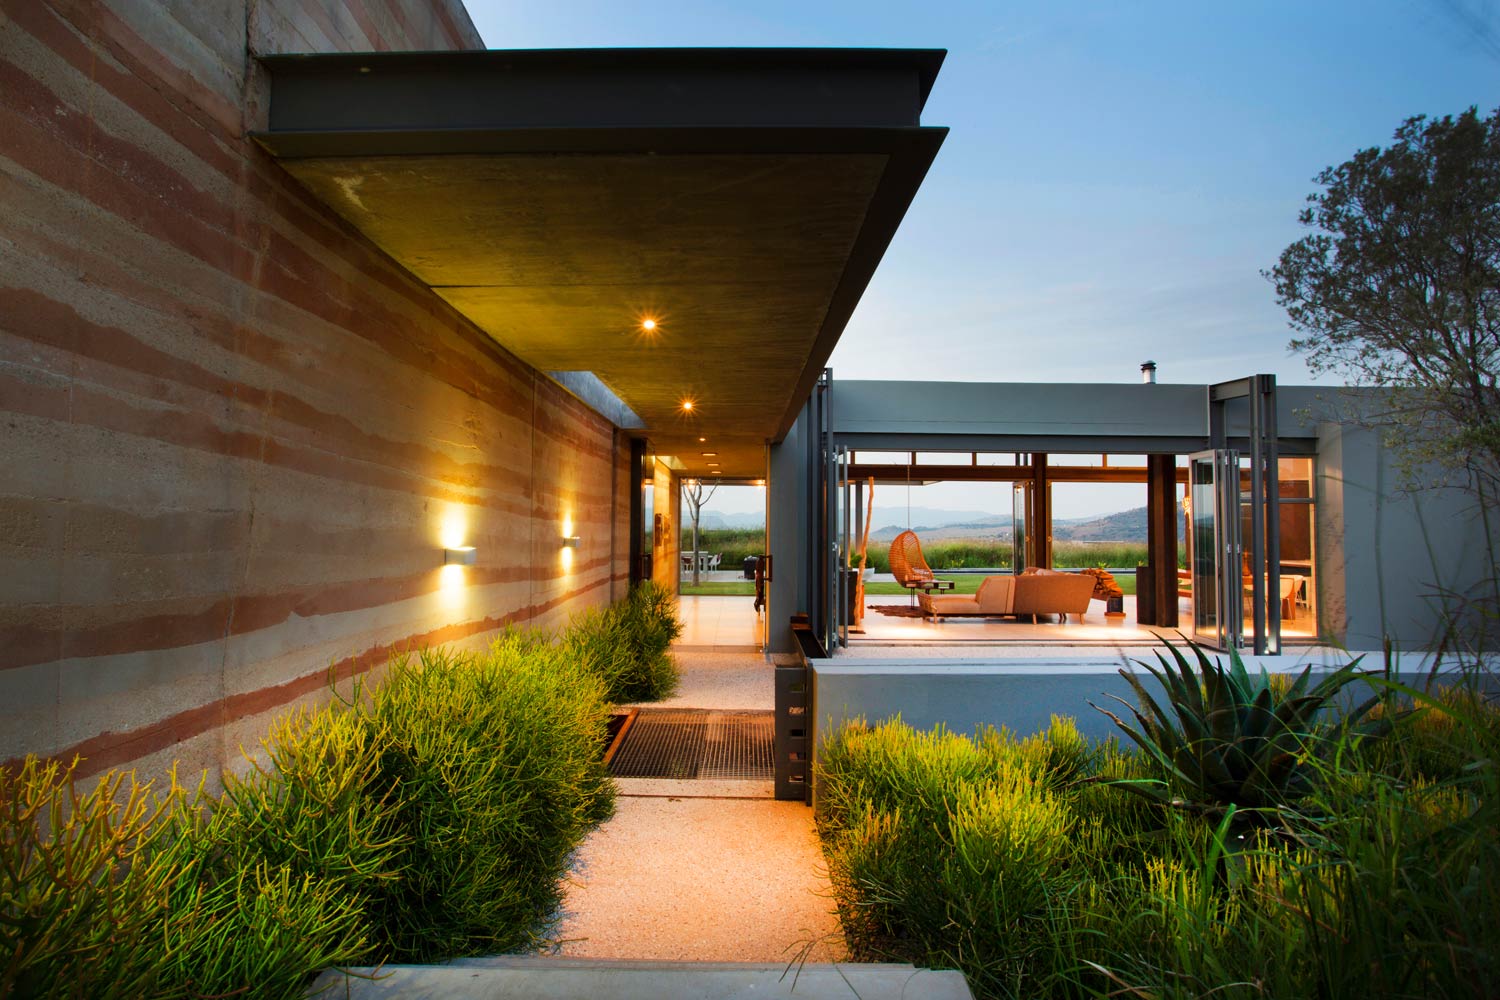 Modern Residential Architecture Inspiration: View Through Entryway